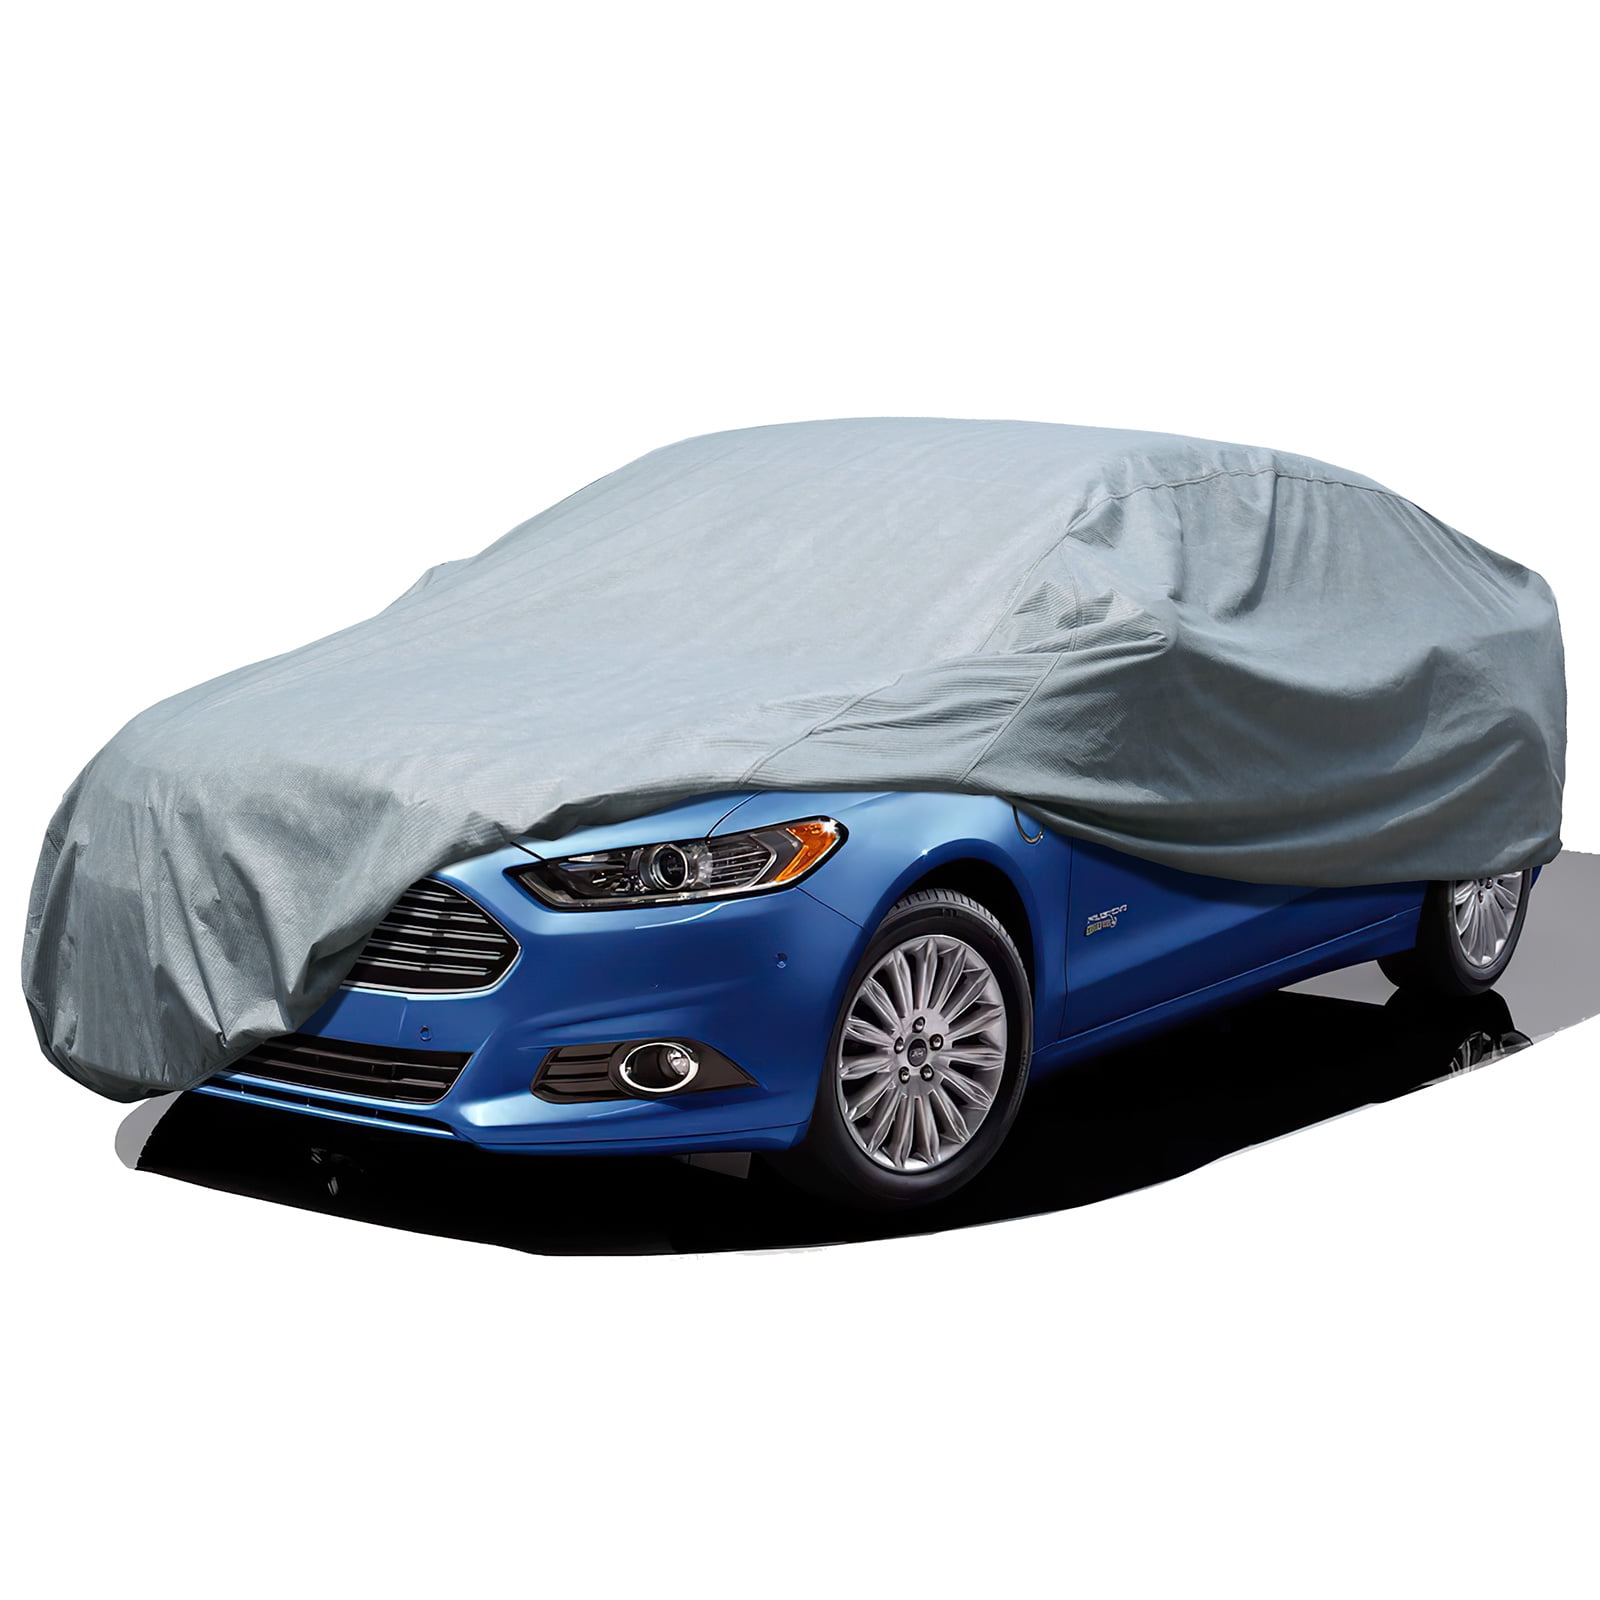 Leader Accessories Car Cover Basic Guard 3 Layer Dust UV Ray Resistant Universal Fit Outdoor Full Sedan Cover Up To 185 